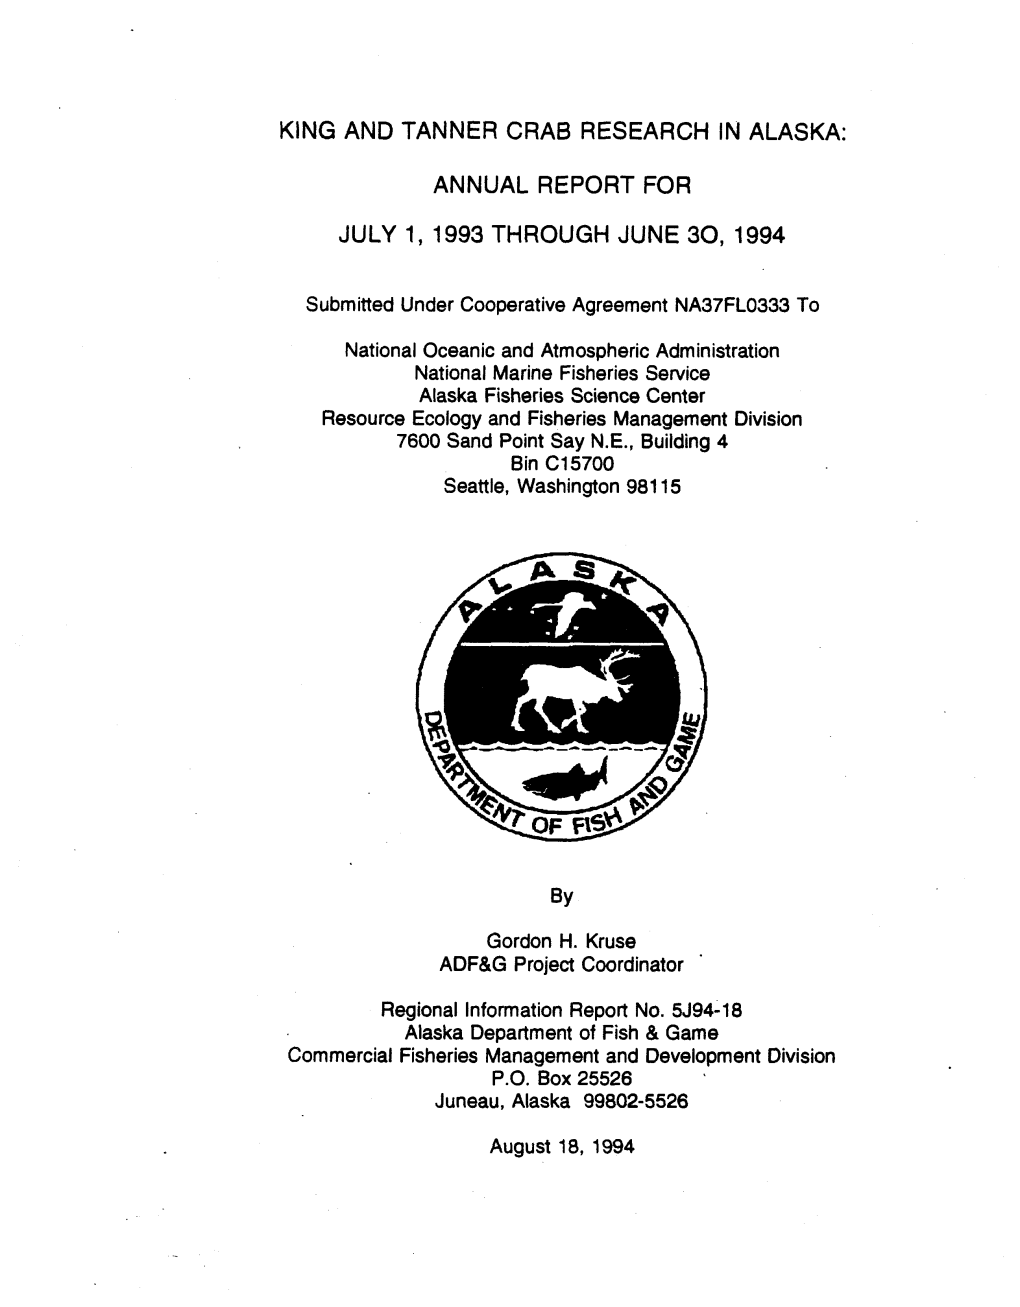 King and Tanner Crab Research in Alaska: Annual Report for July 1, 1993 Through June 30, 1994